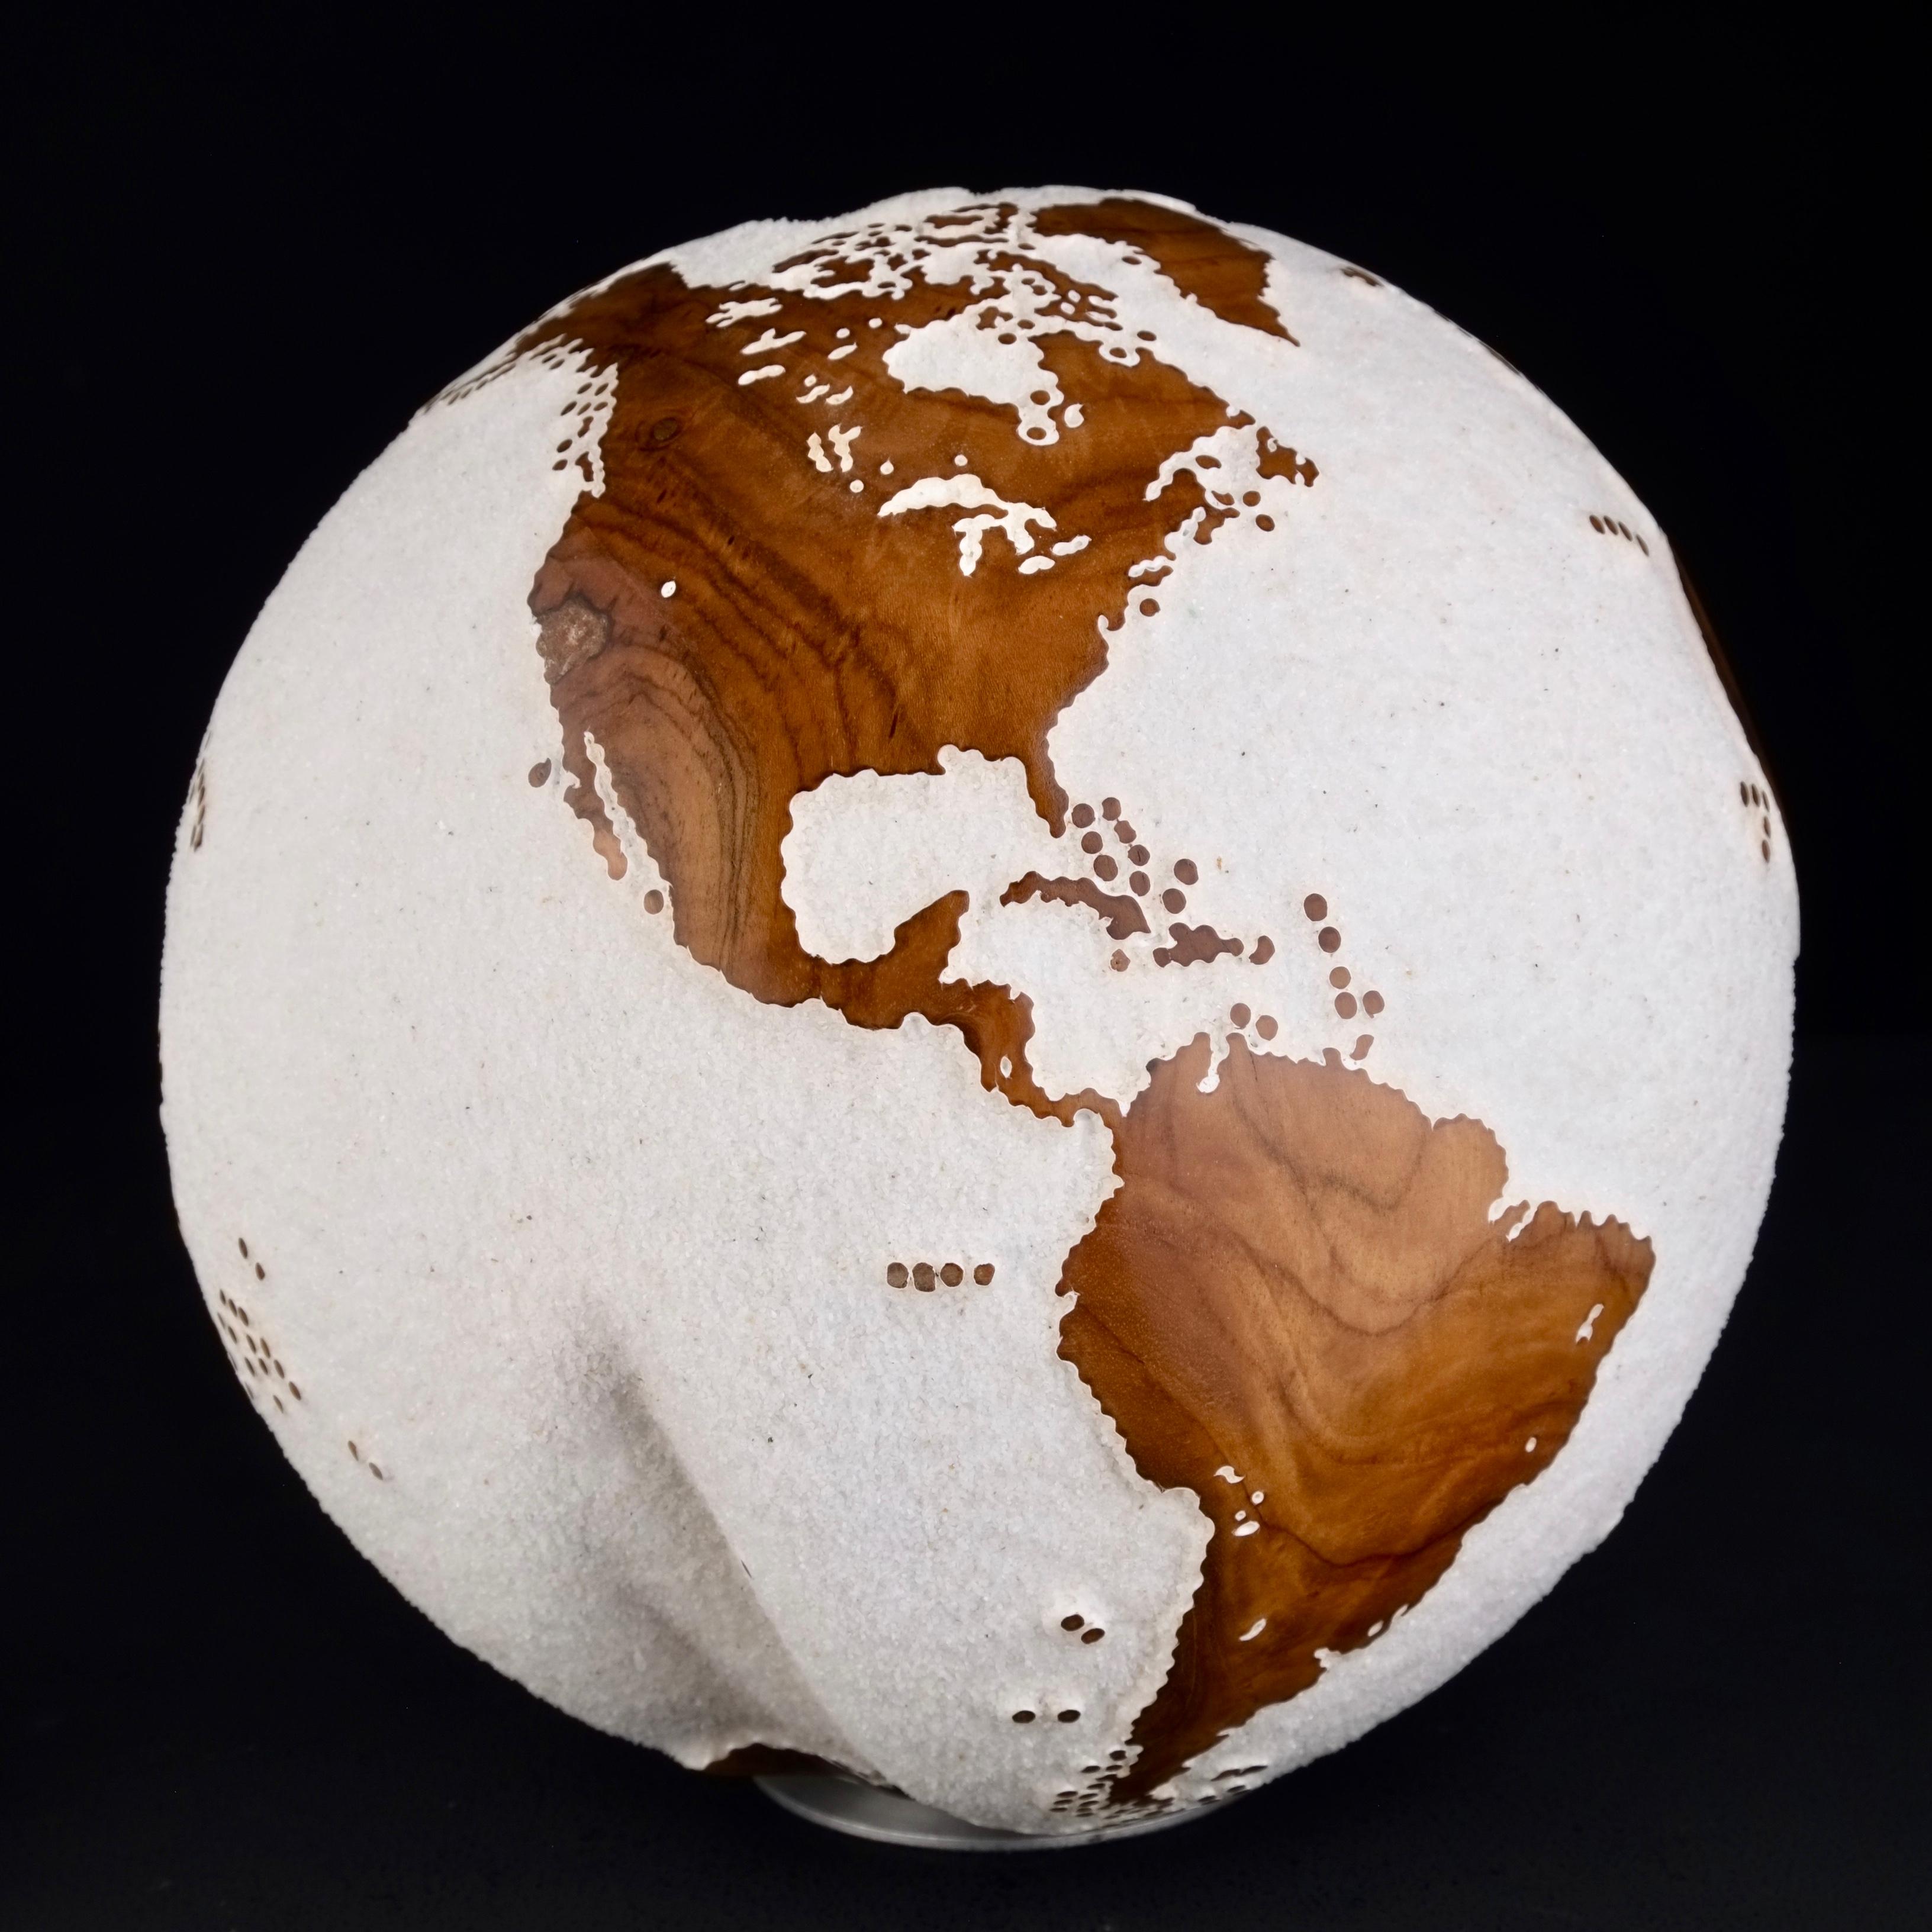 Teakwood and white lava sand make this beautiful turning globe a real stunning sculpture.
Made from a whole piece of wood the way the sculpture is shaped is defined by how the tree grew.
Sitting on a turning base the sculpture can spin silently